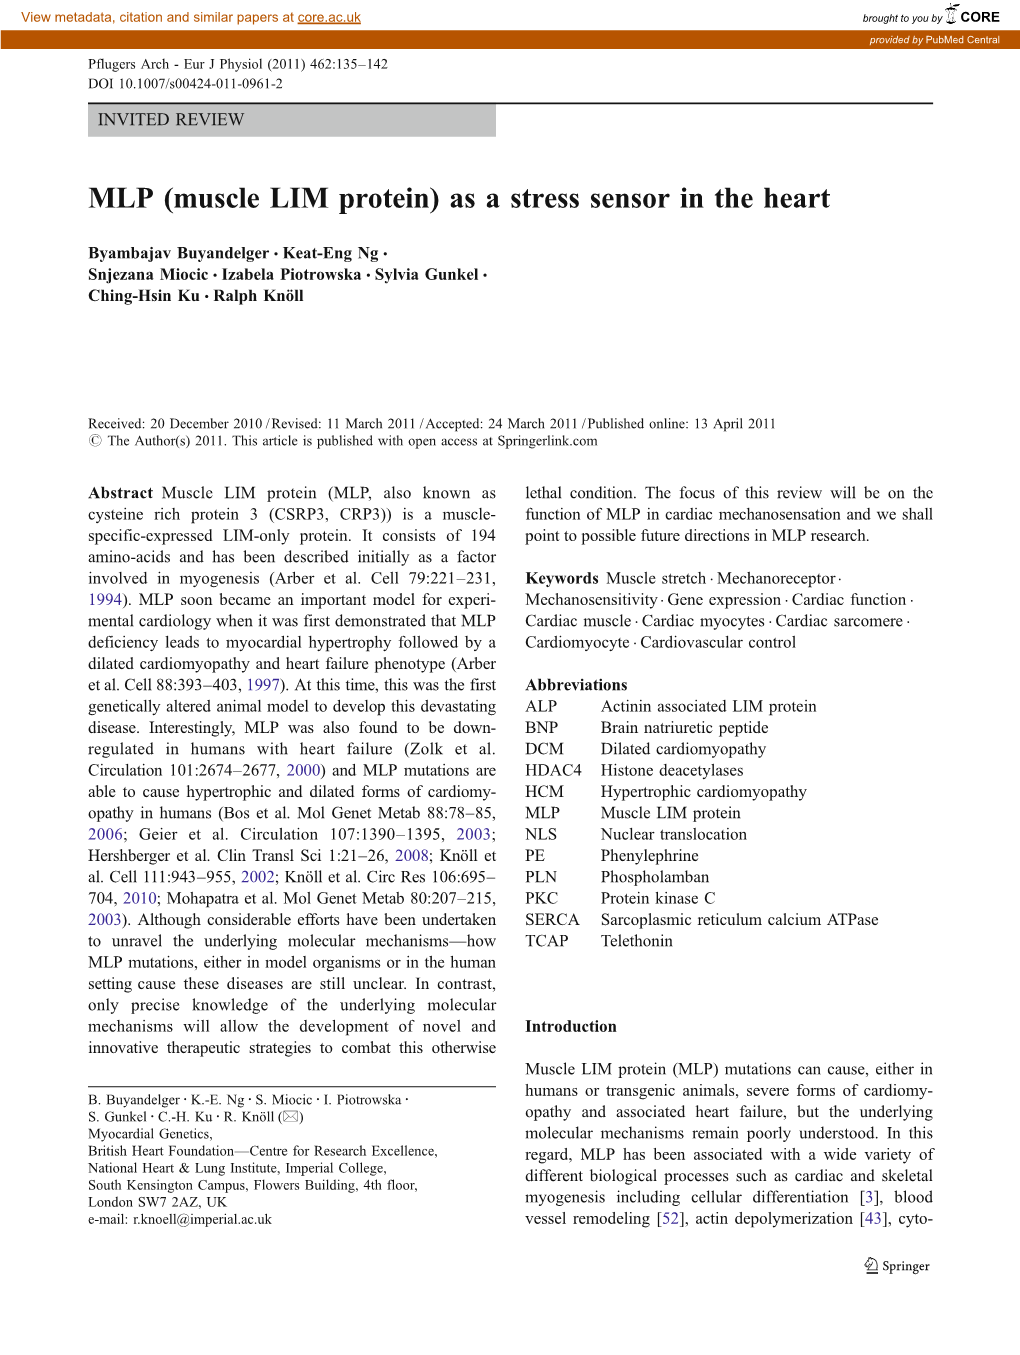 MLP (Muscle LIM Protein) As a Stress Sensor in the Heart